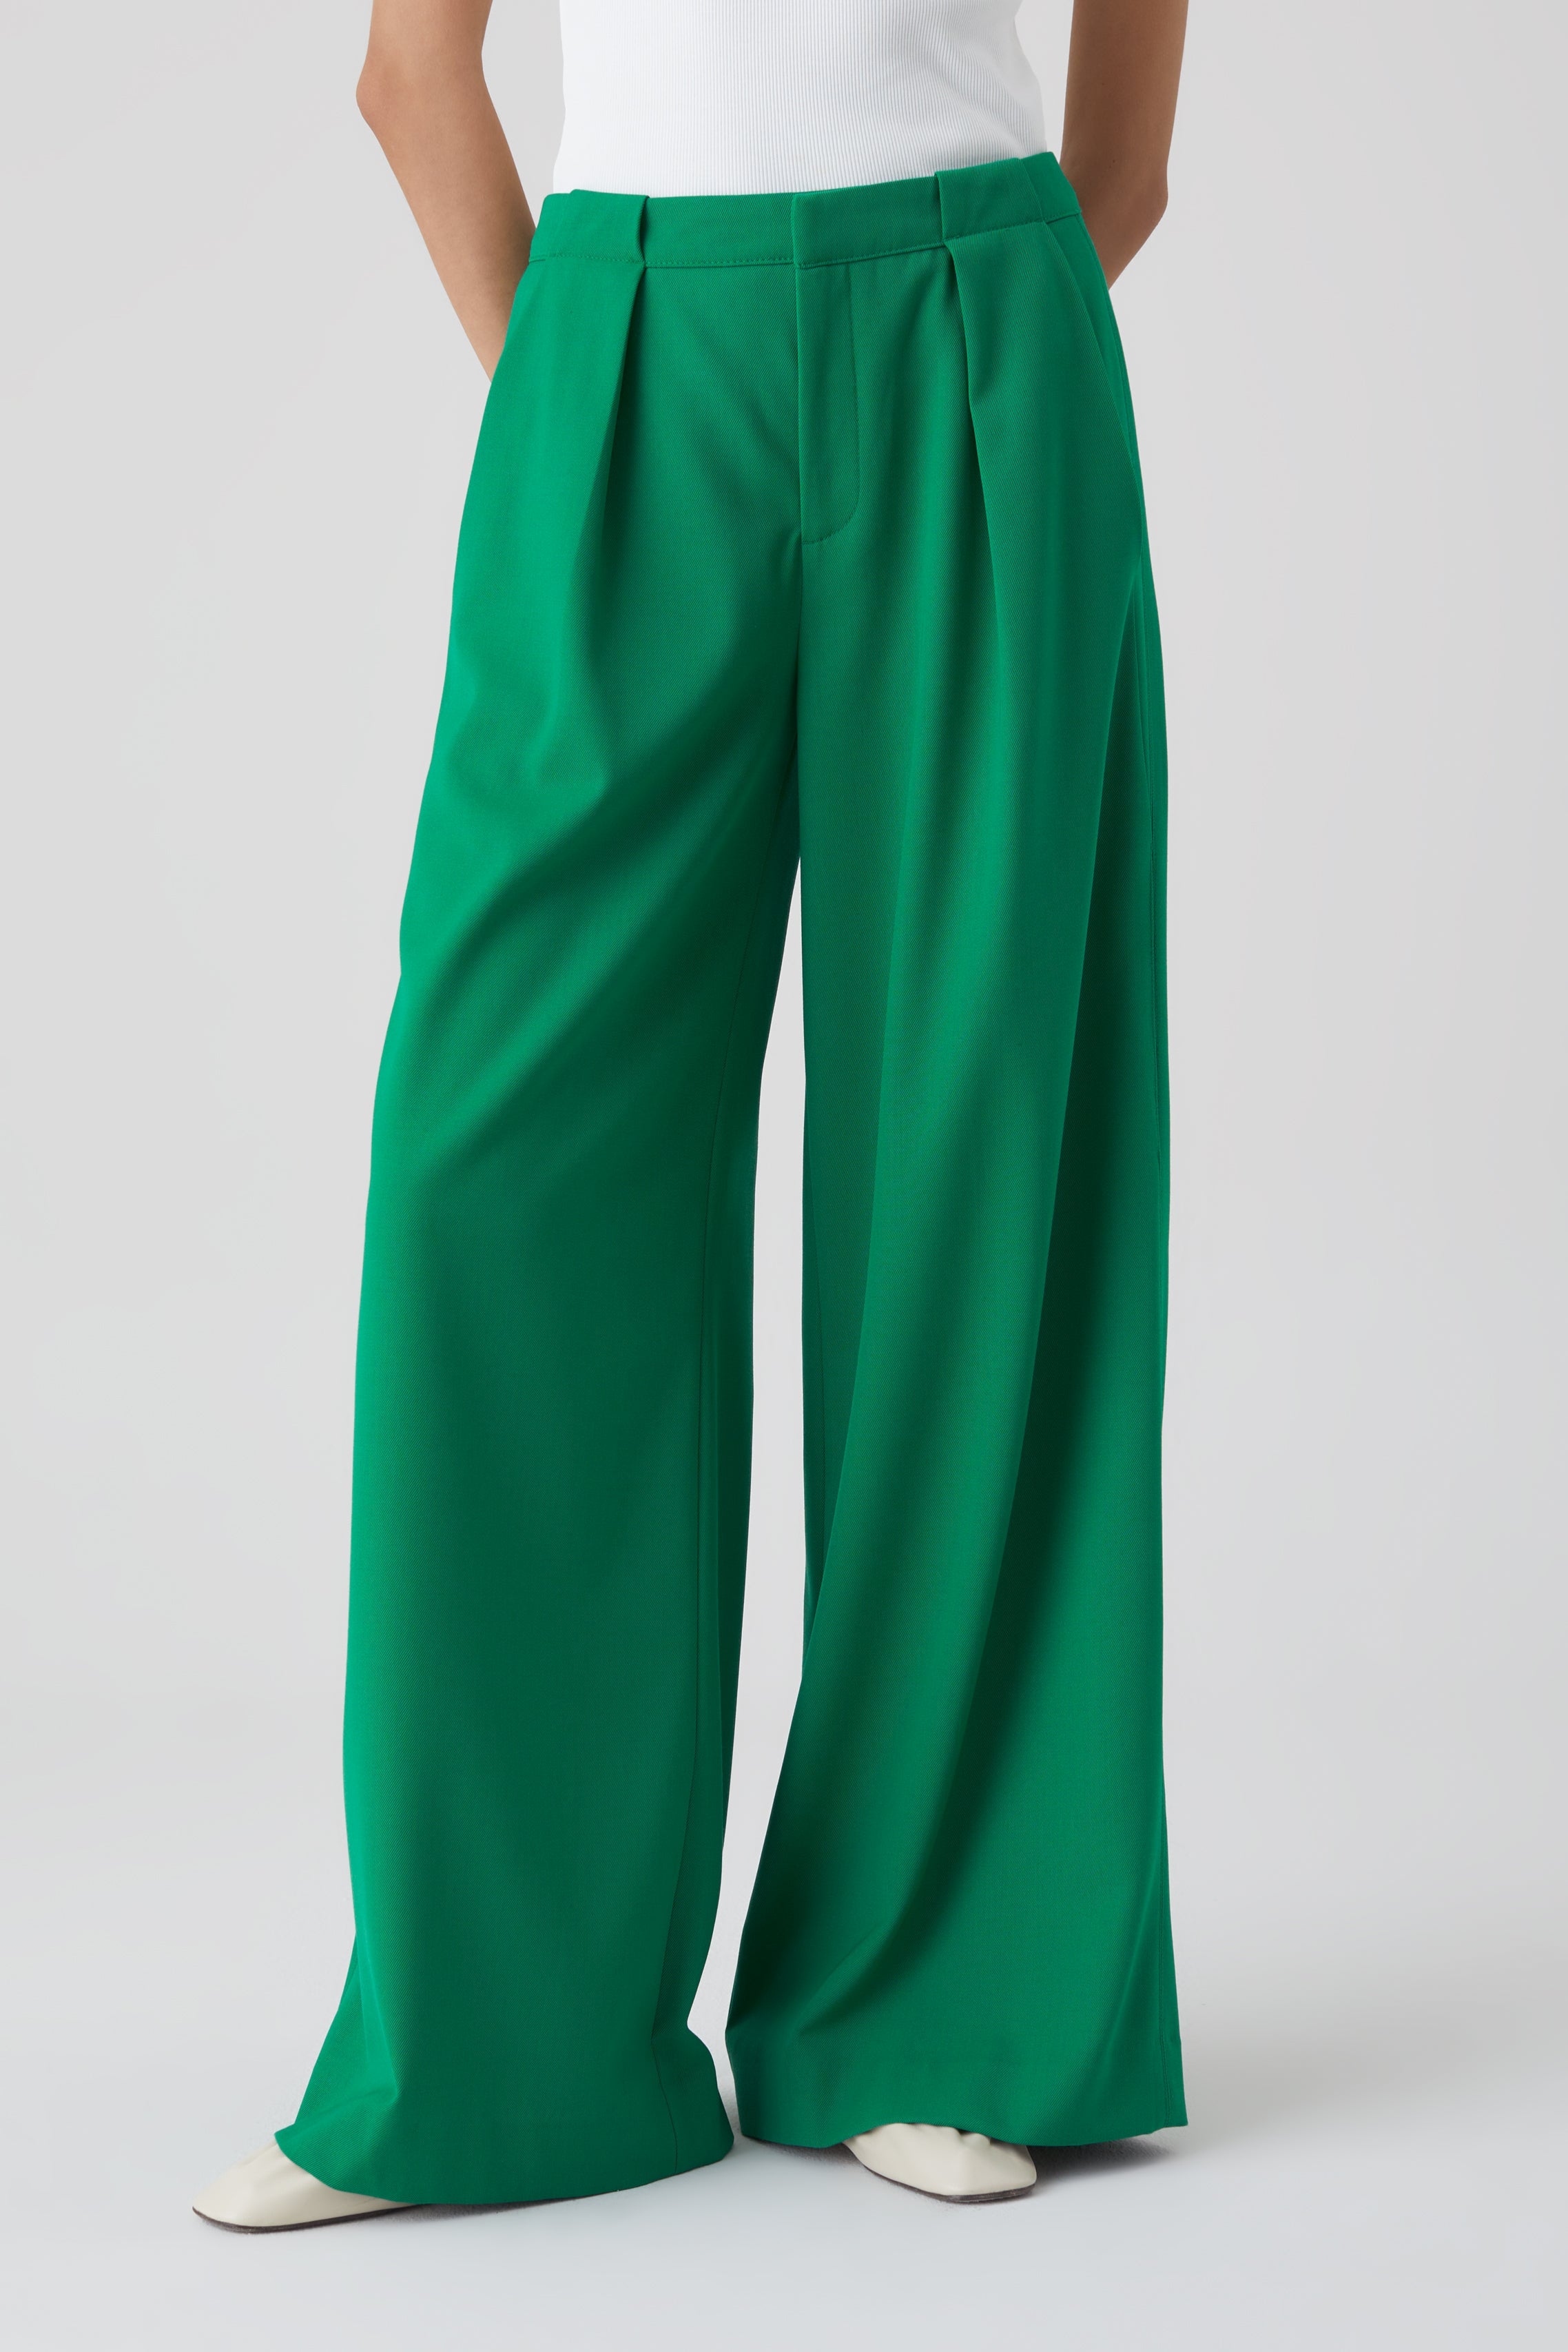 CLOSED-OUTLET-SALE-STYLE-NAME-RYLAN-PANTS-Hosen-ARCHIVE-COLLECTION-3_000ebd57-3c42-4ae2-9c8c-9e85d830a58a.jpg